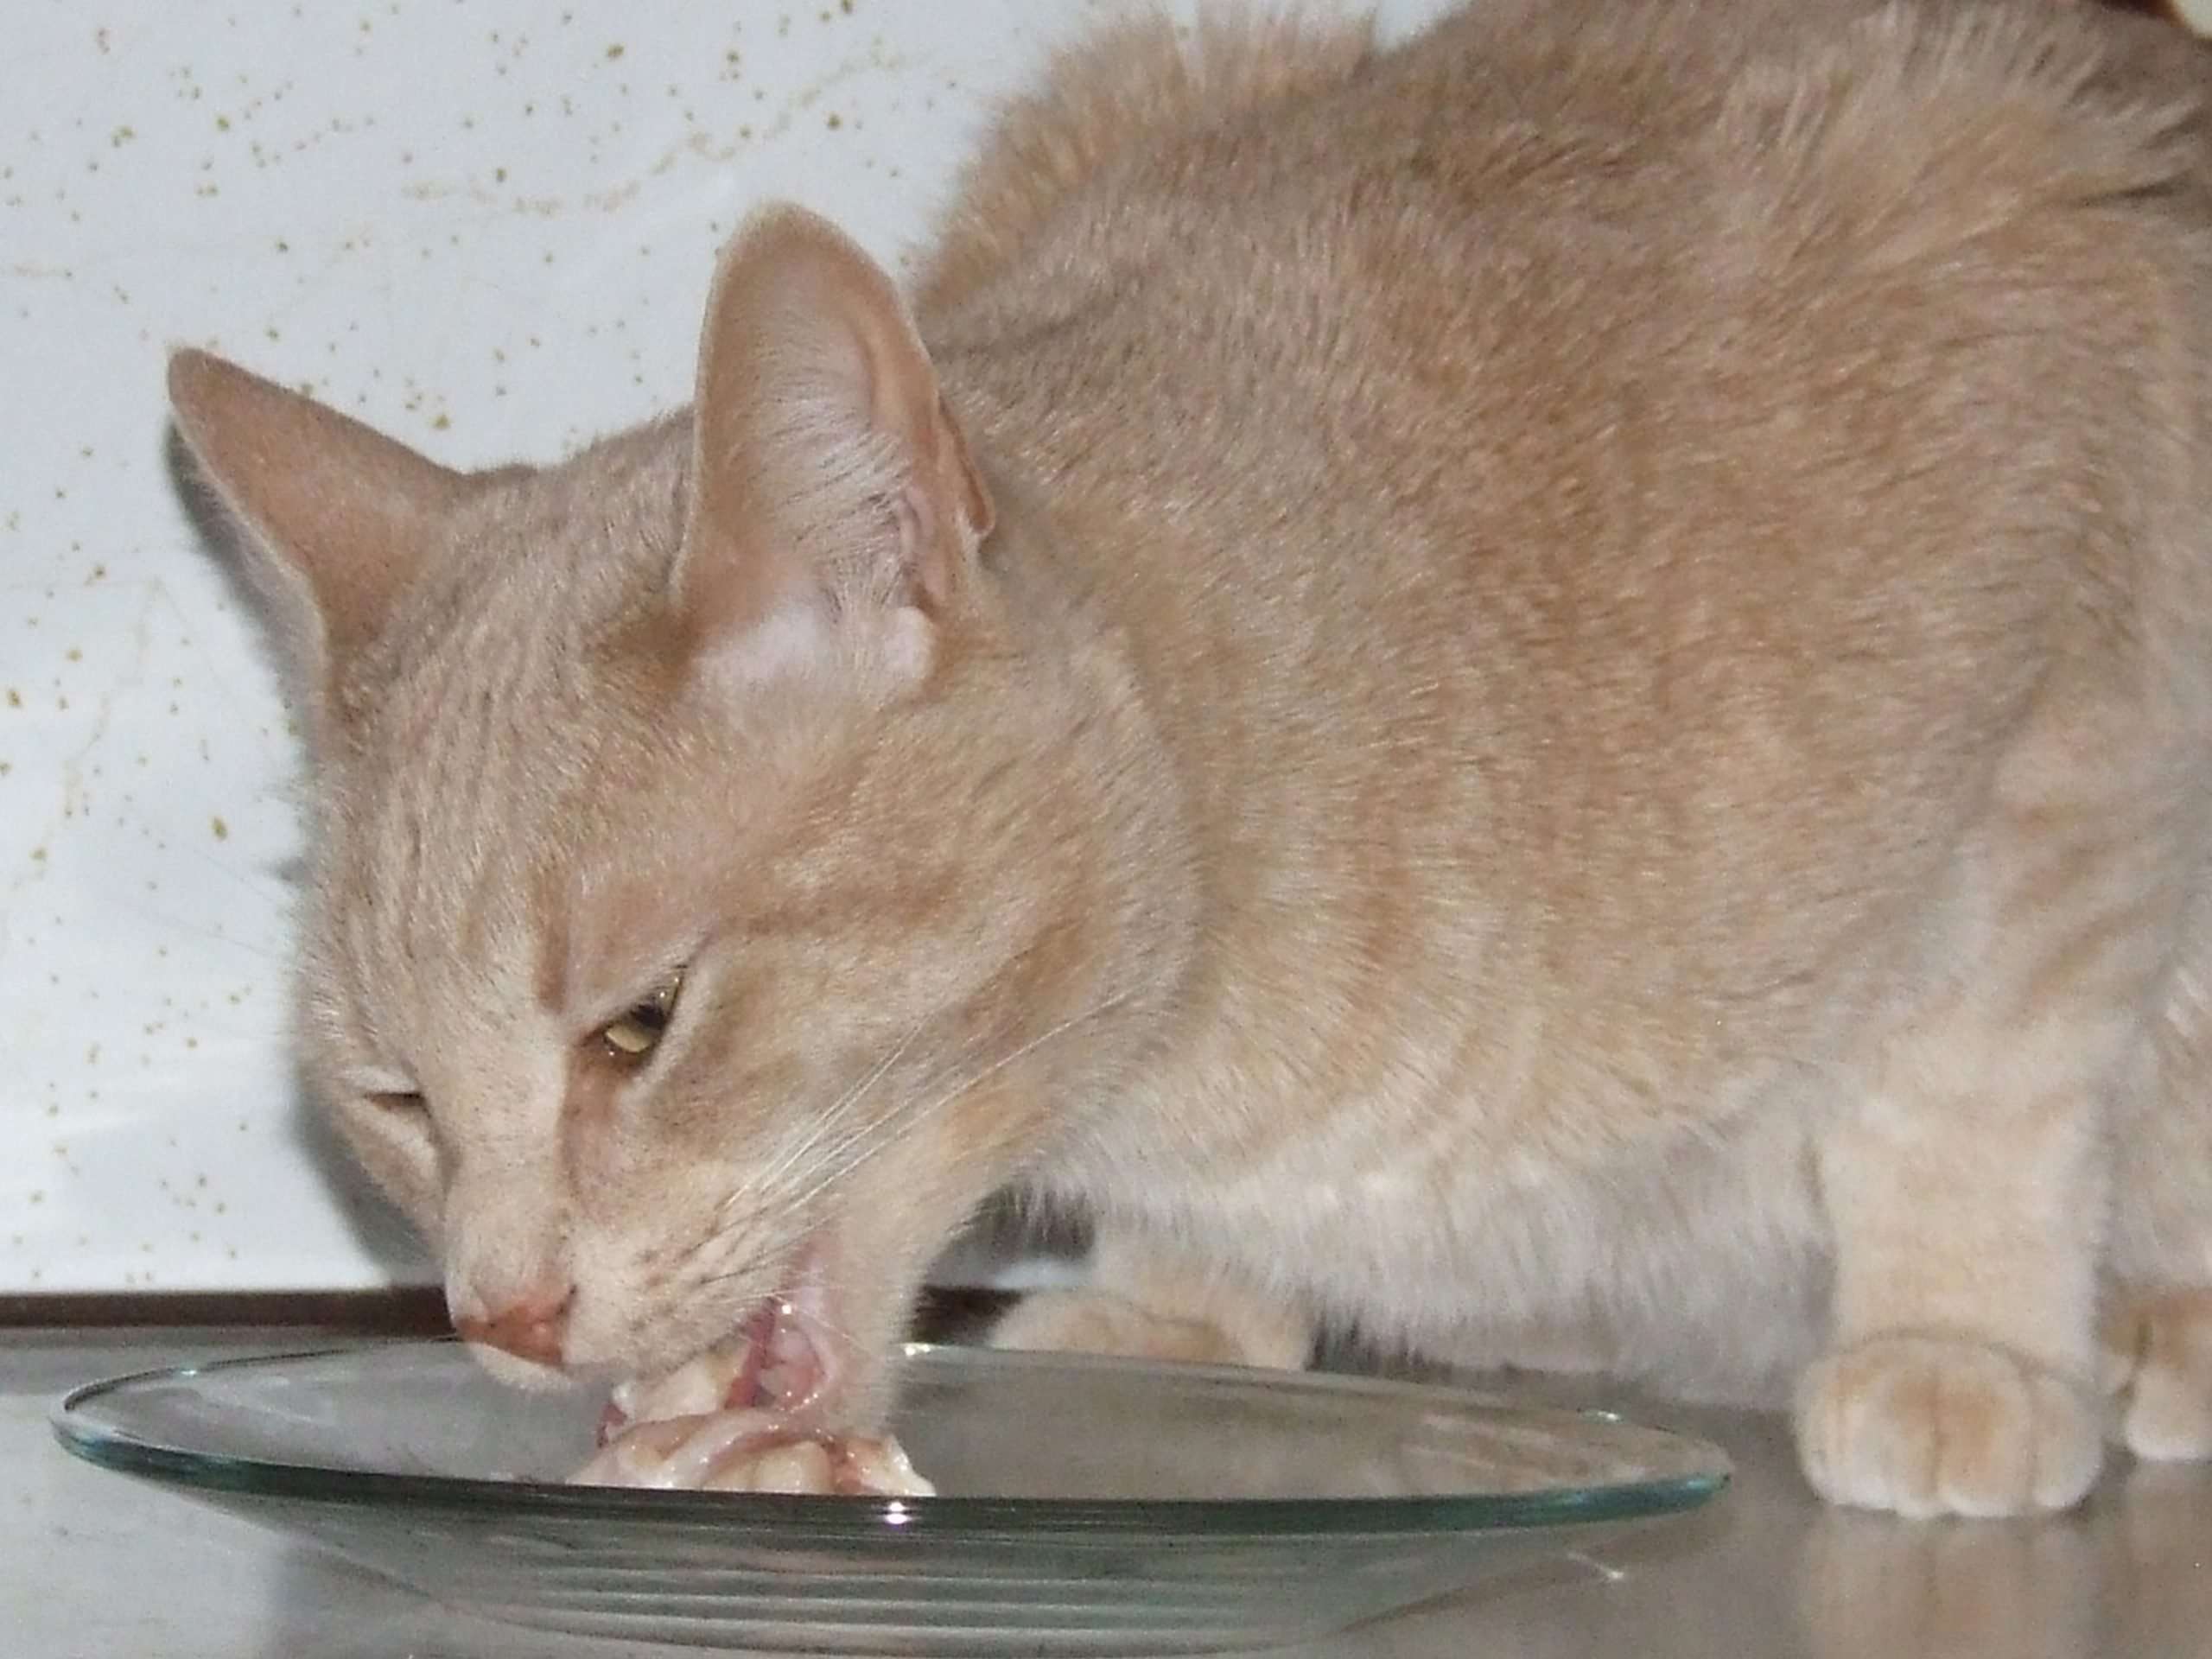 Q& A: Can I feed my cats raw meat snacks if I